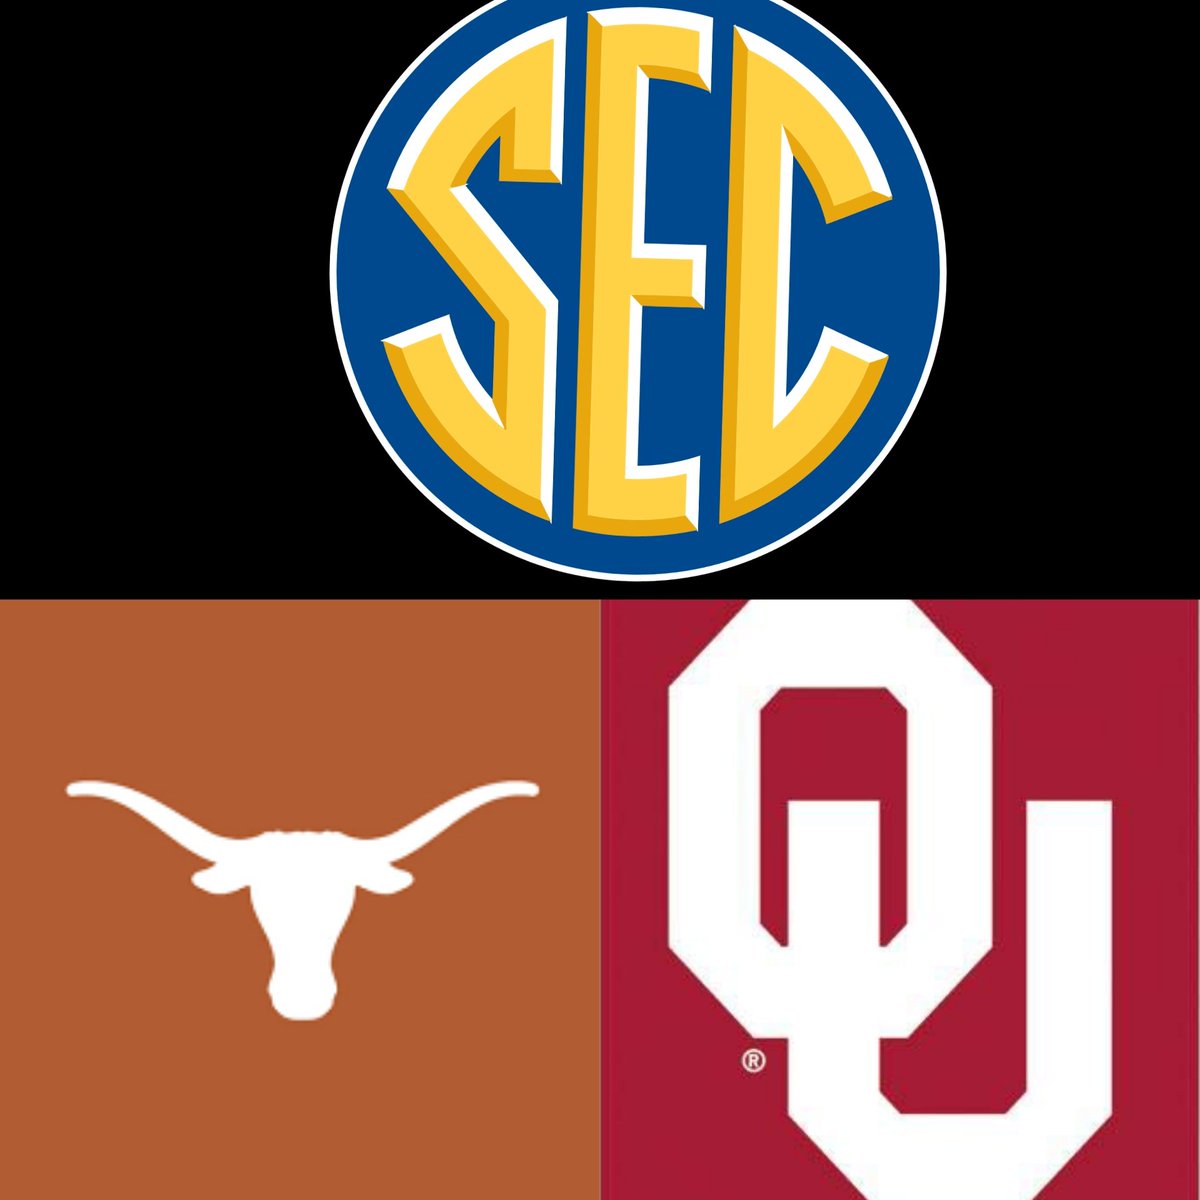 Breaking news!!!
#SEC commissioner Sankey announces that #Oklahoma and #Texas Will be a part of the #SoutheasternConference as of July '24. 
Source @espn @ESPNCFB